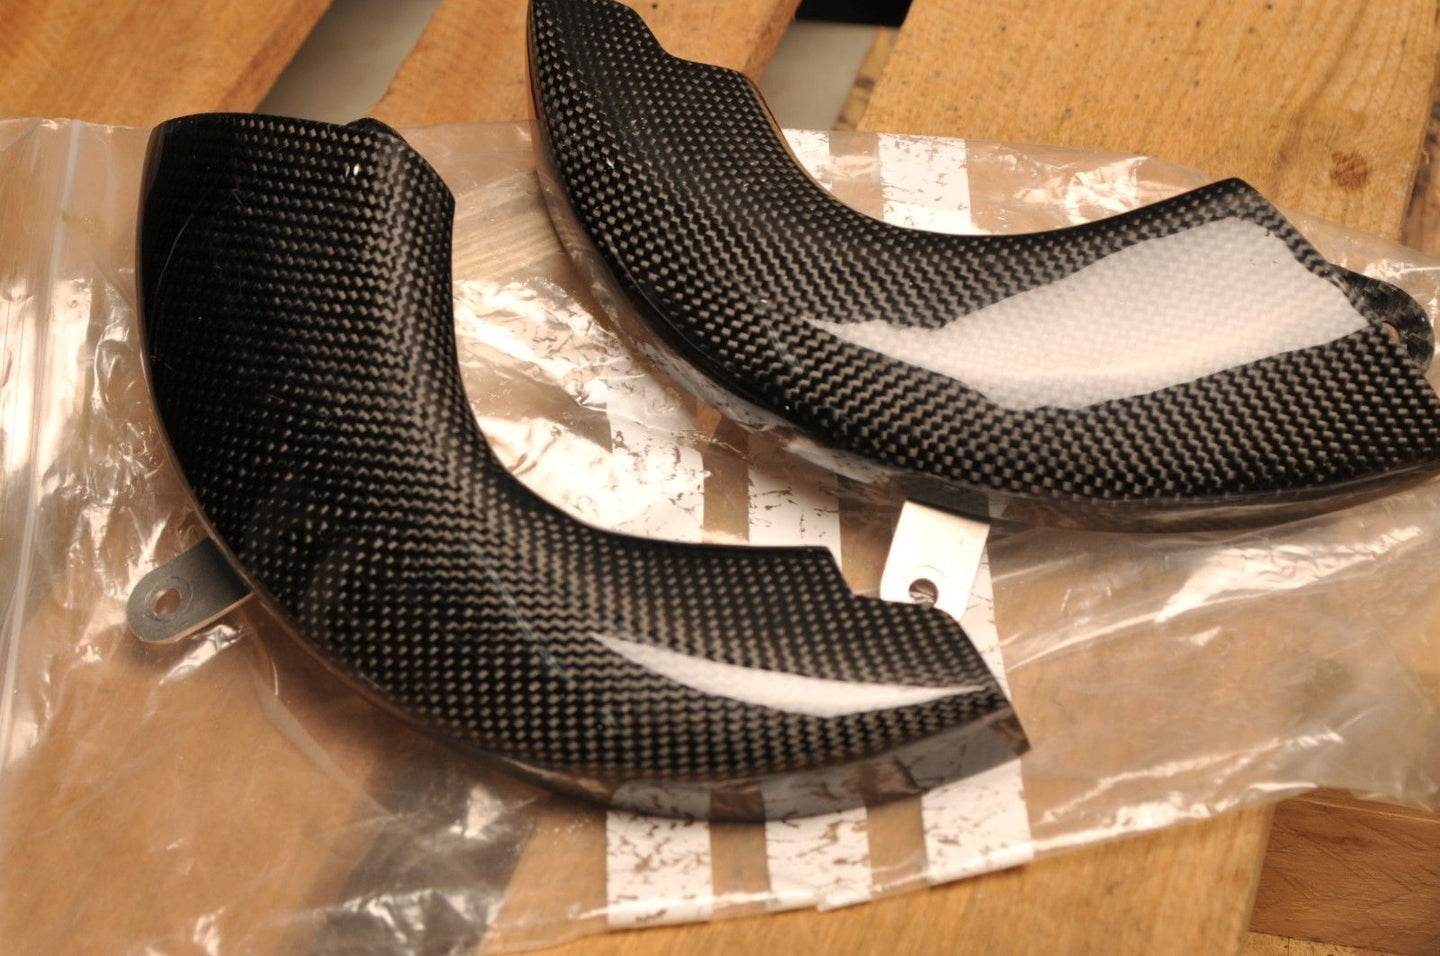 YAMAHA R6 2006 CARBON FIBER FIBRE RACING BRAKE DUCT DUCTS KIT SCOOPS GP STYLE